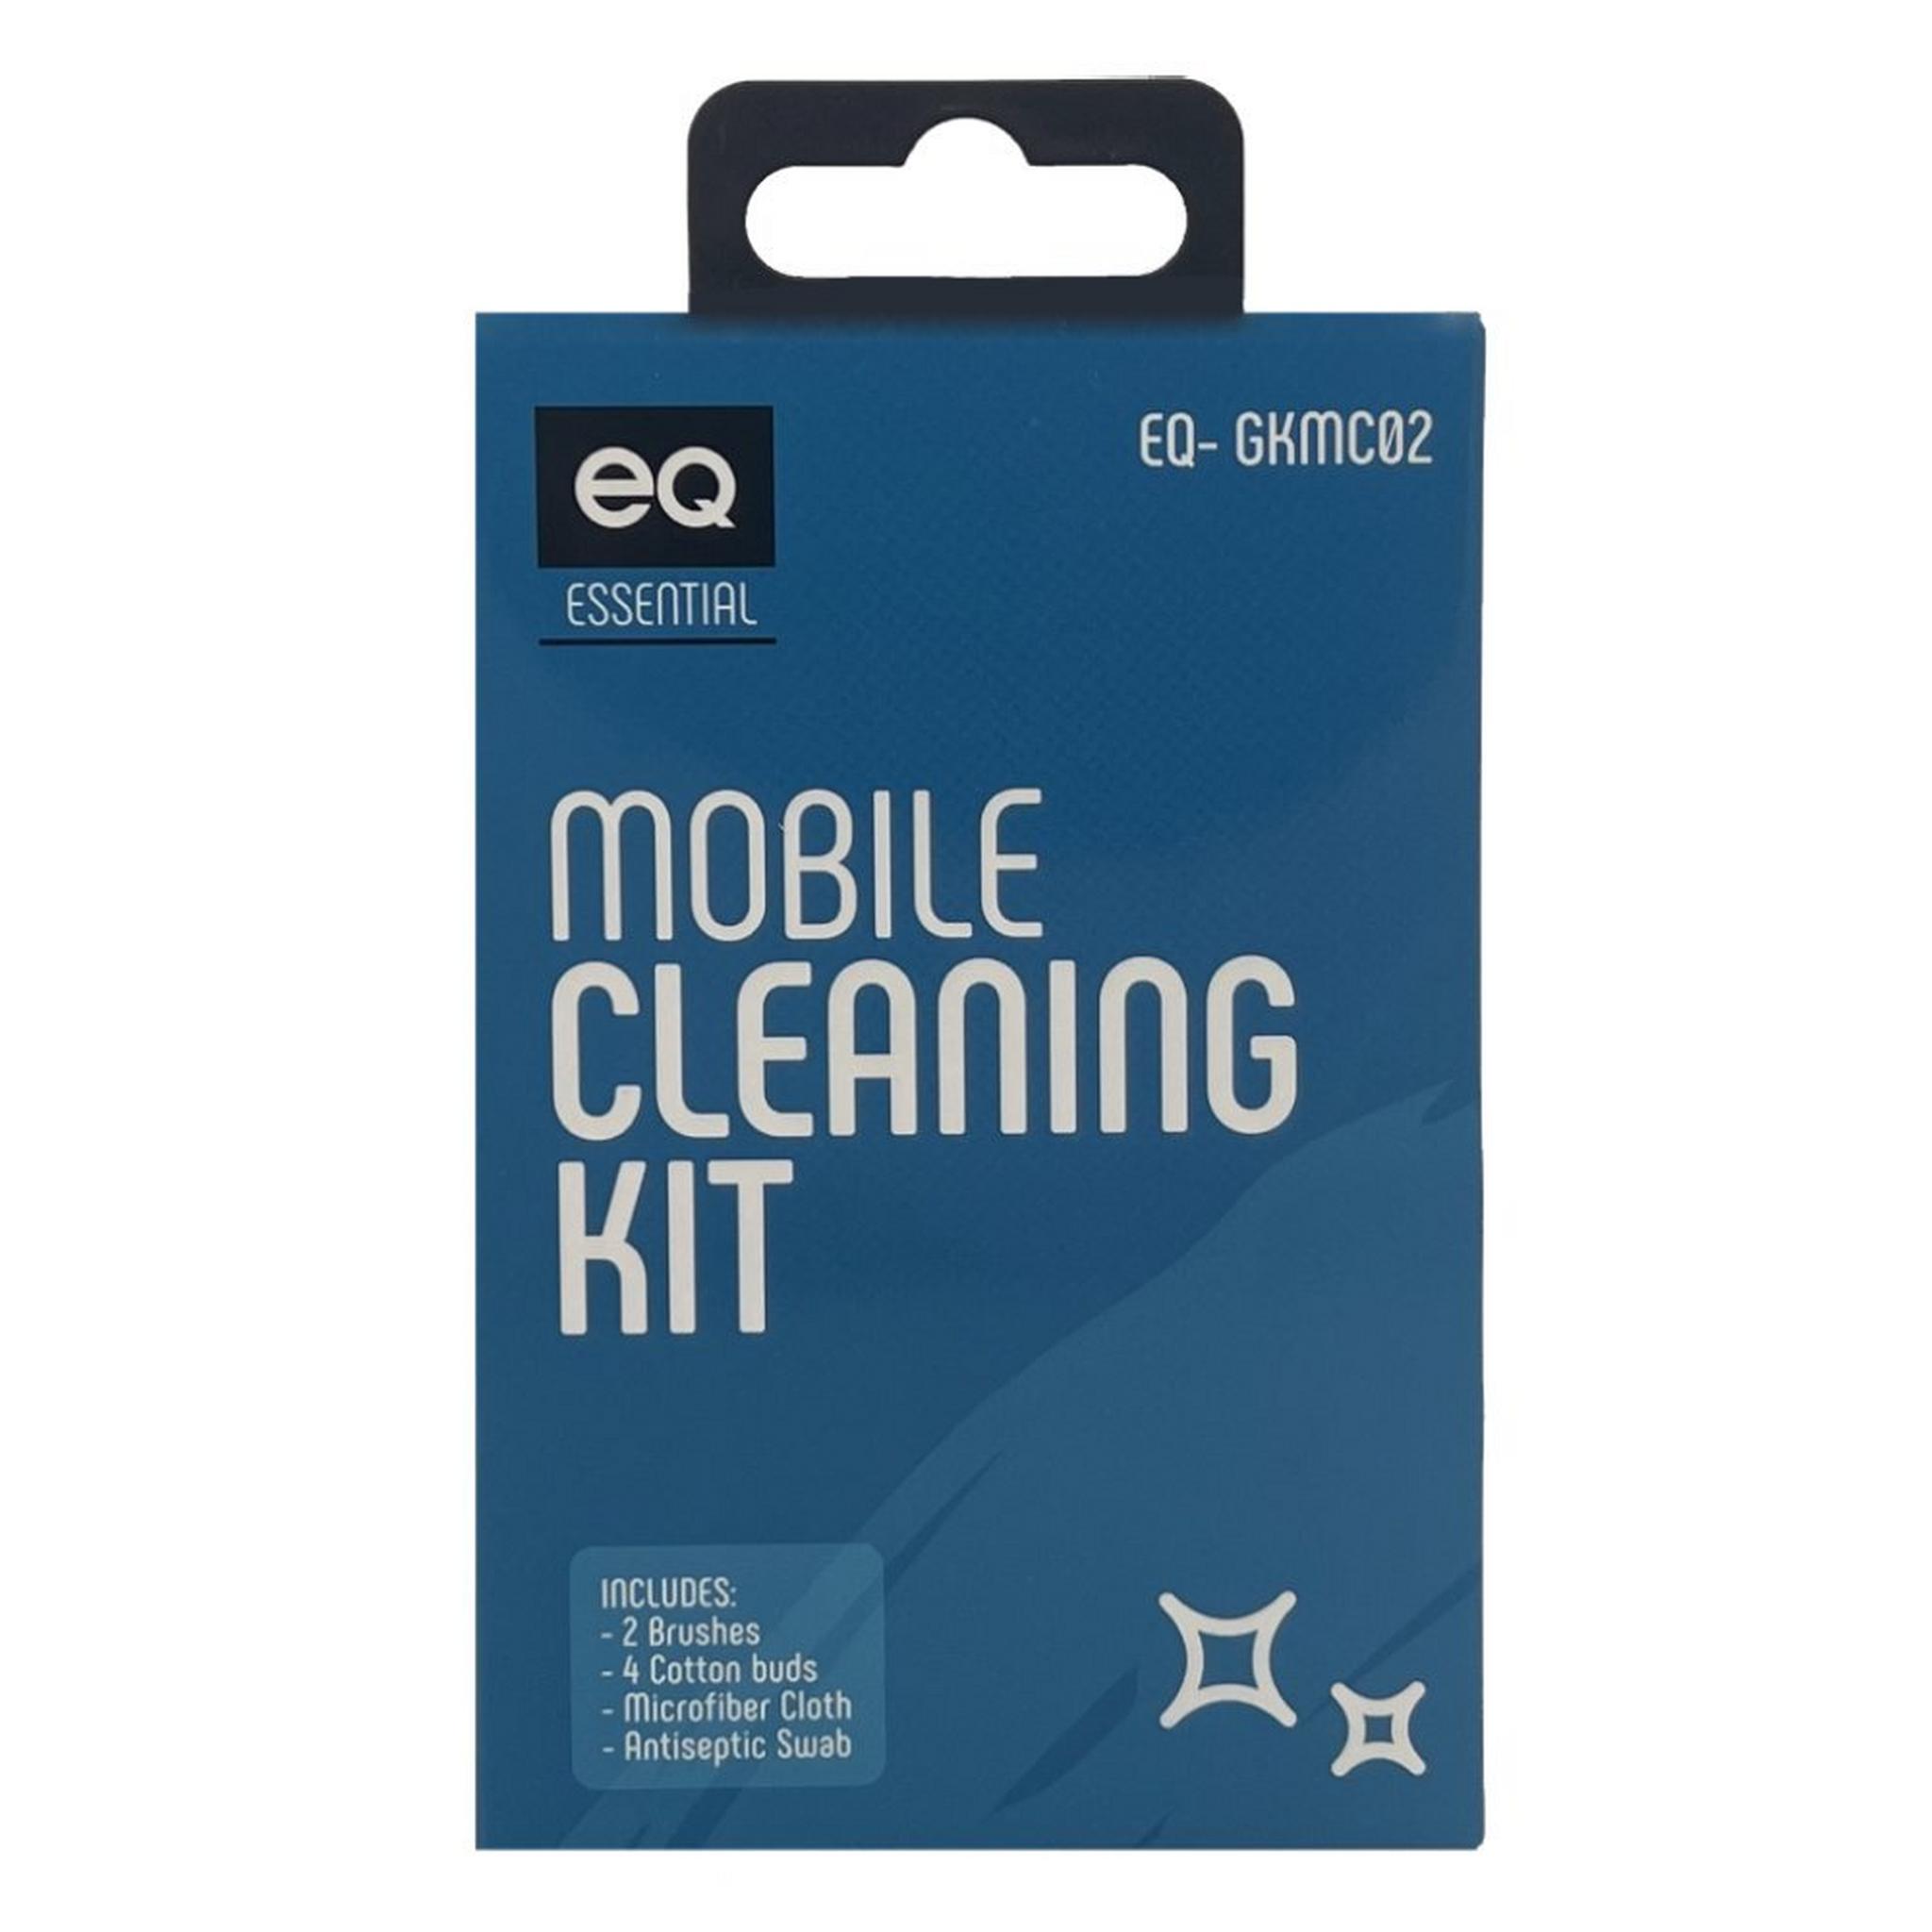 EQ Cleaning Kit for Smart Devices